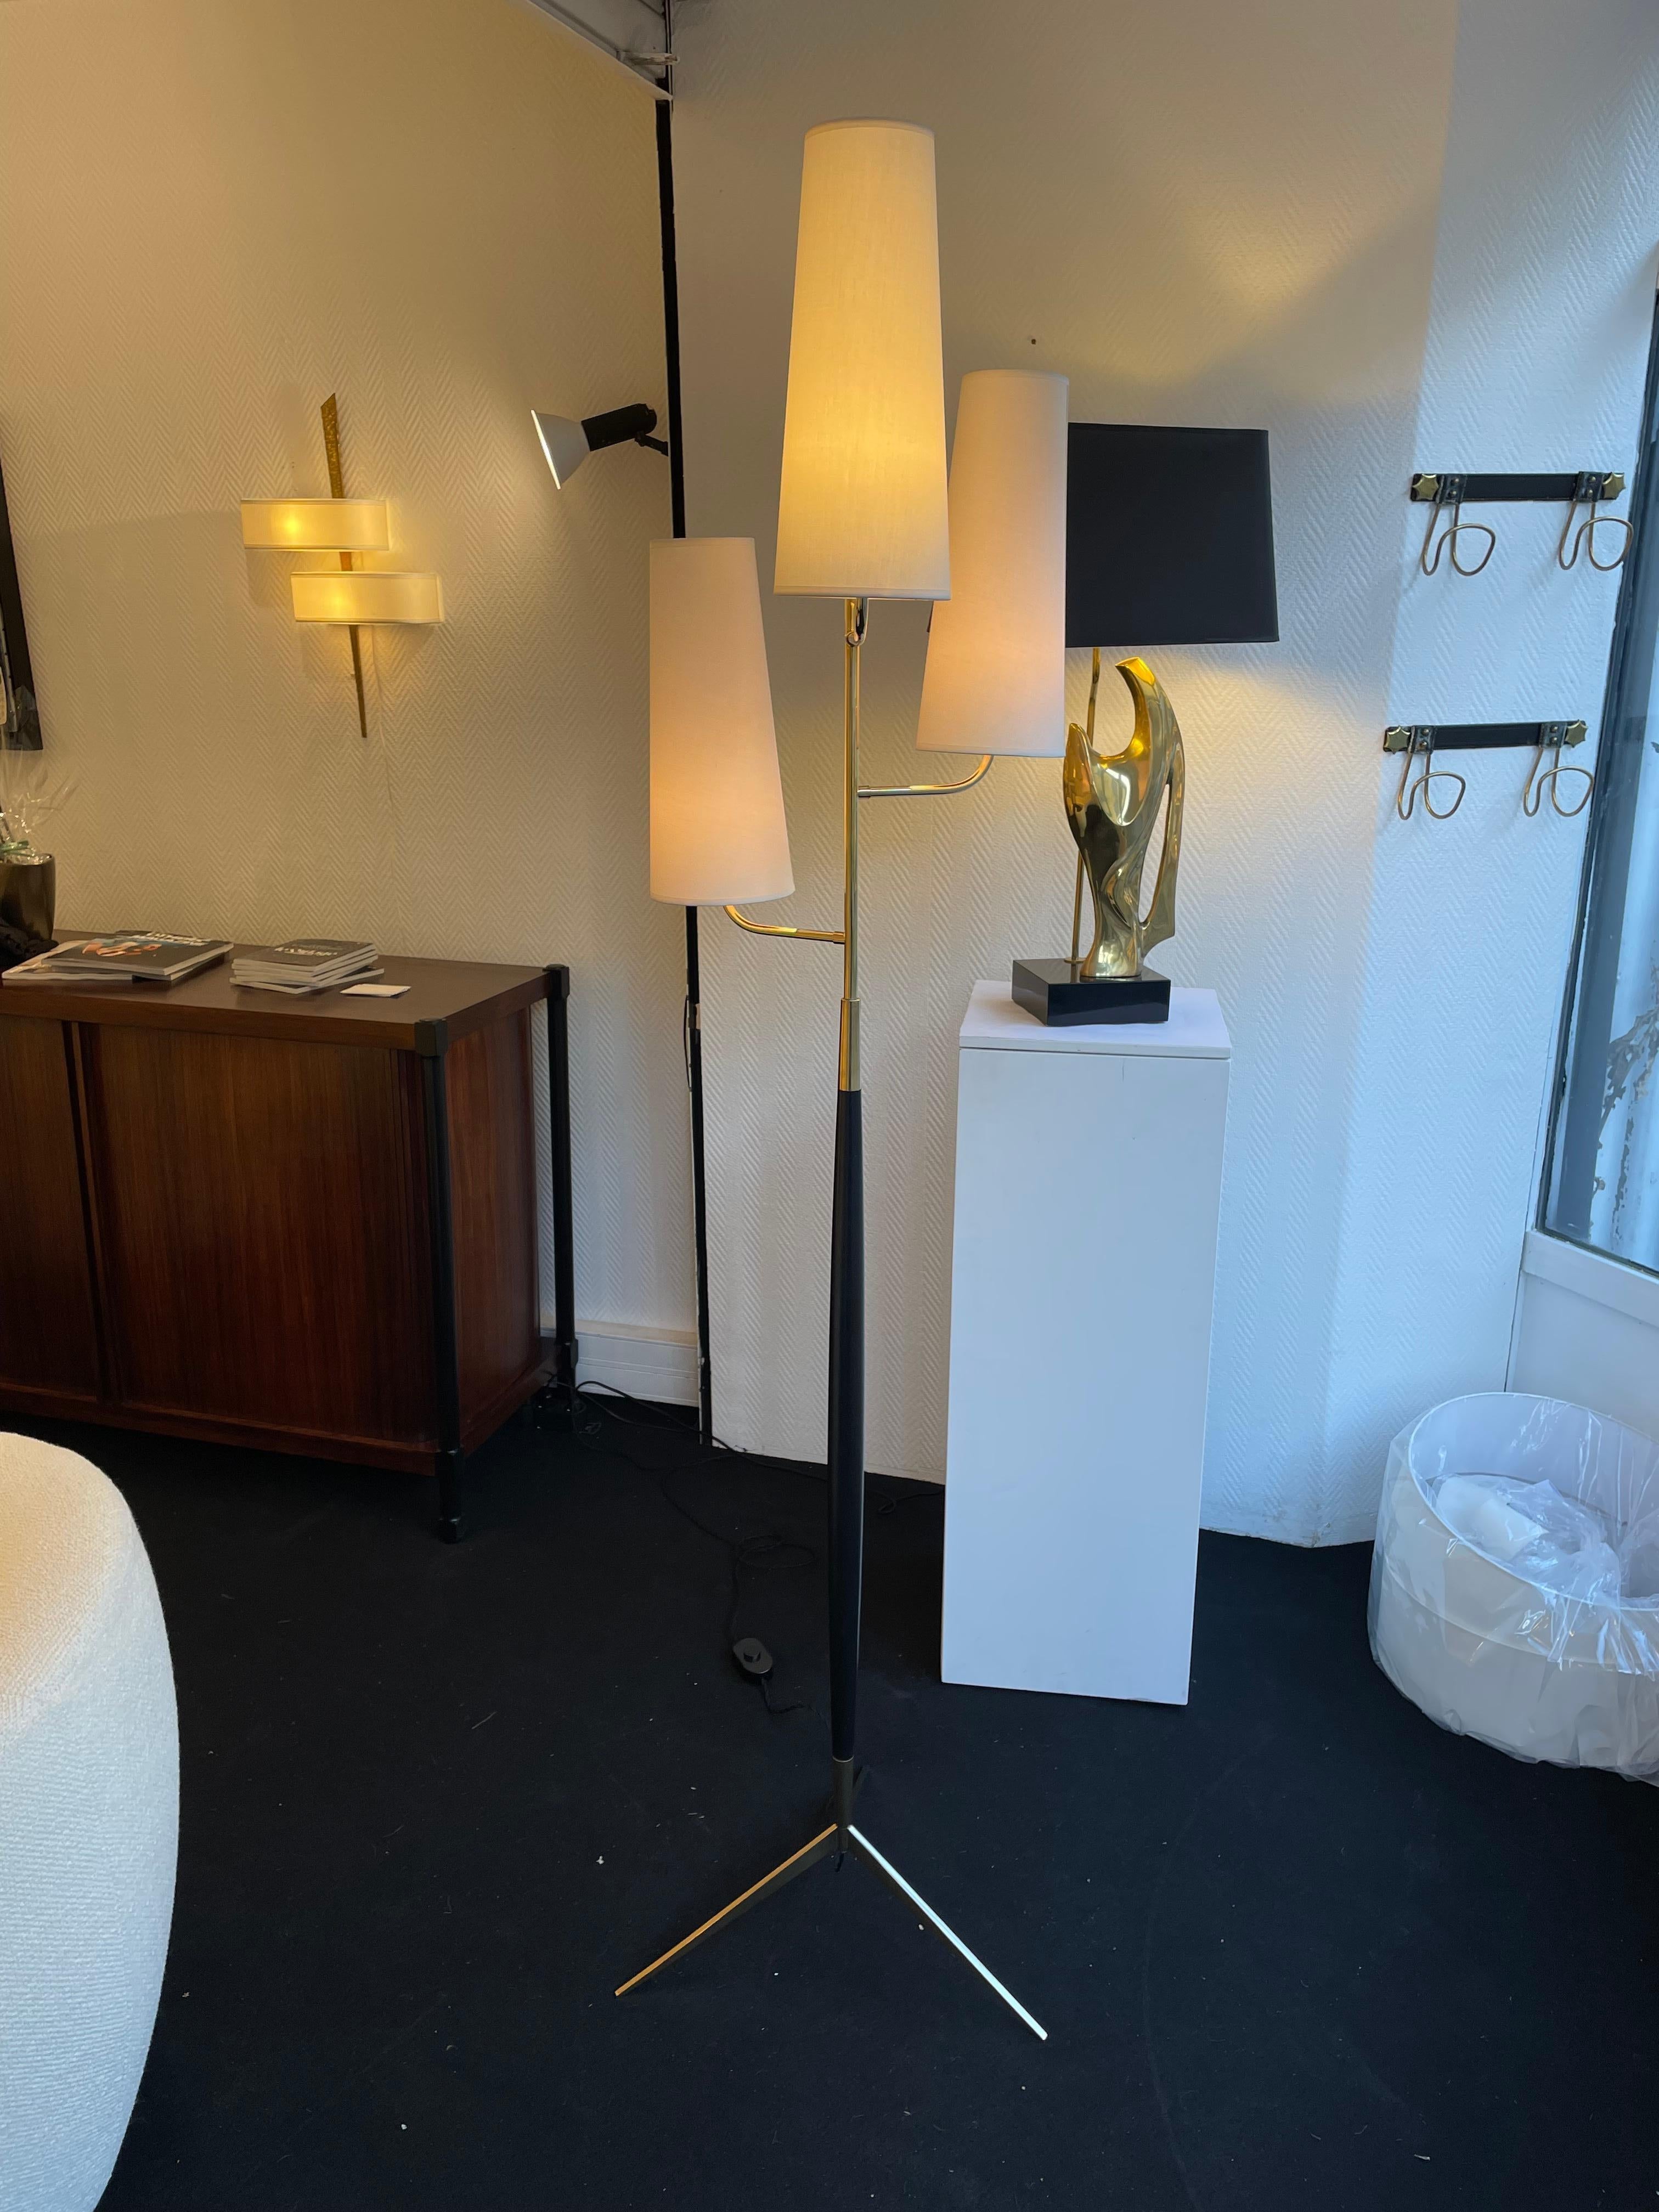 Floor lamp by Lunel
 from 1950
Wood and brass.